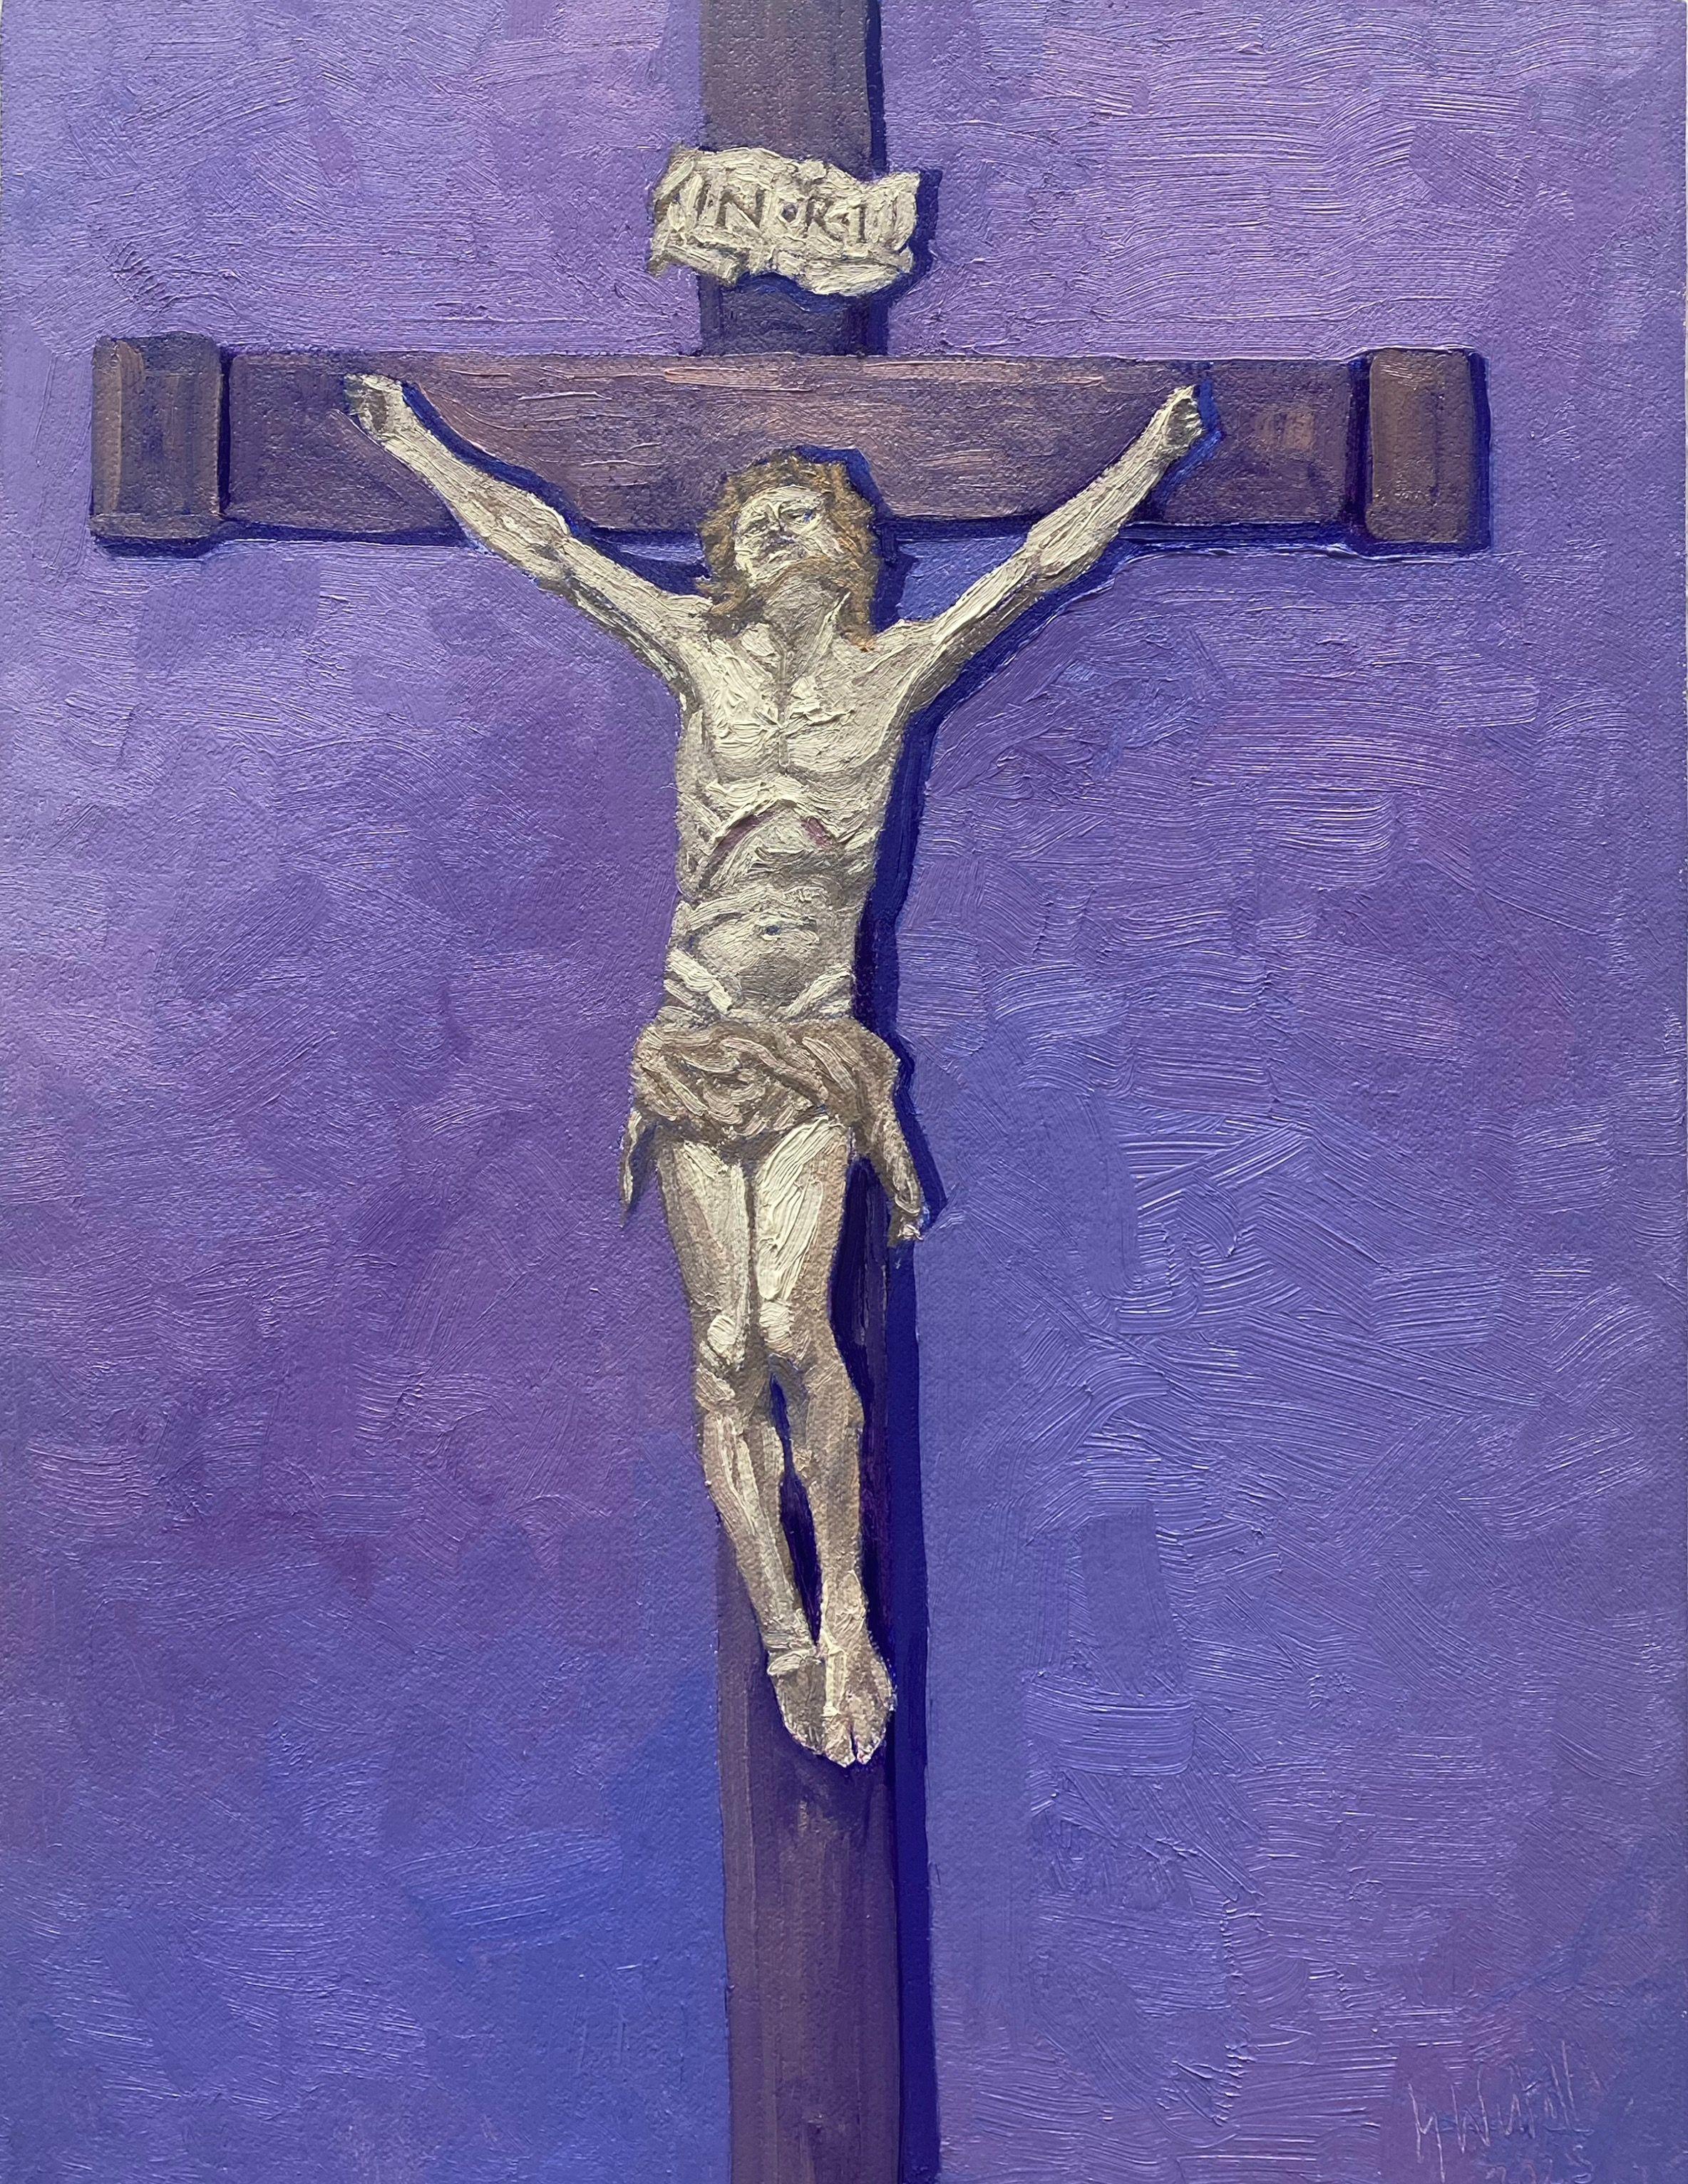 I painted this painting after visiting the Cathedral in Palma, Mallorca. A beautiful place to visit. I took some photos of the Ivory crucifix from the 18th century, donated by Antonio Castillo, this my interpretation. :: Painting :: Impressionist ::